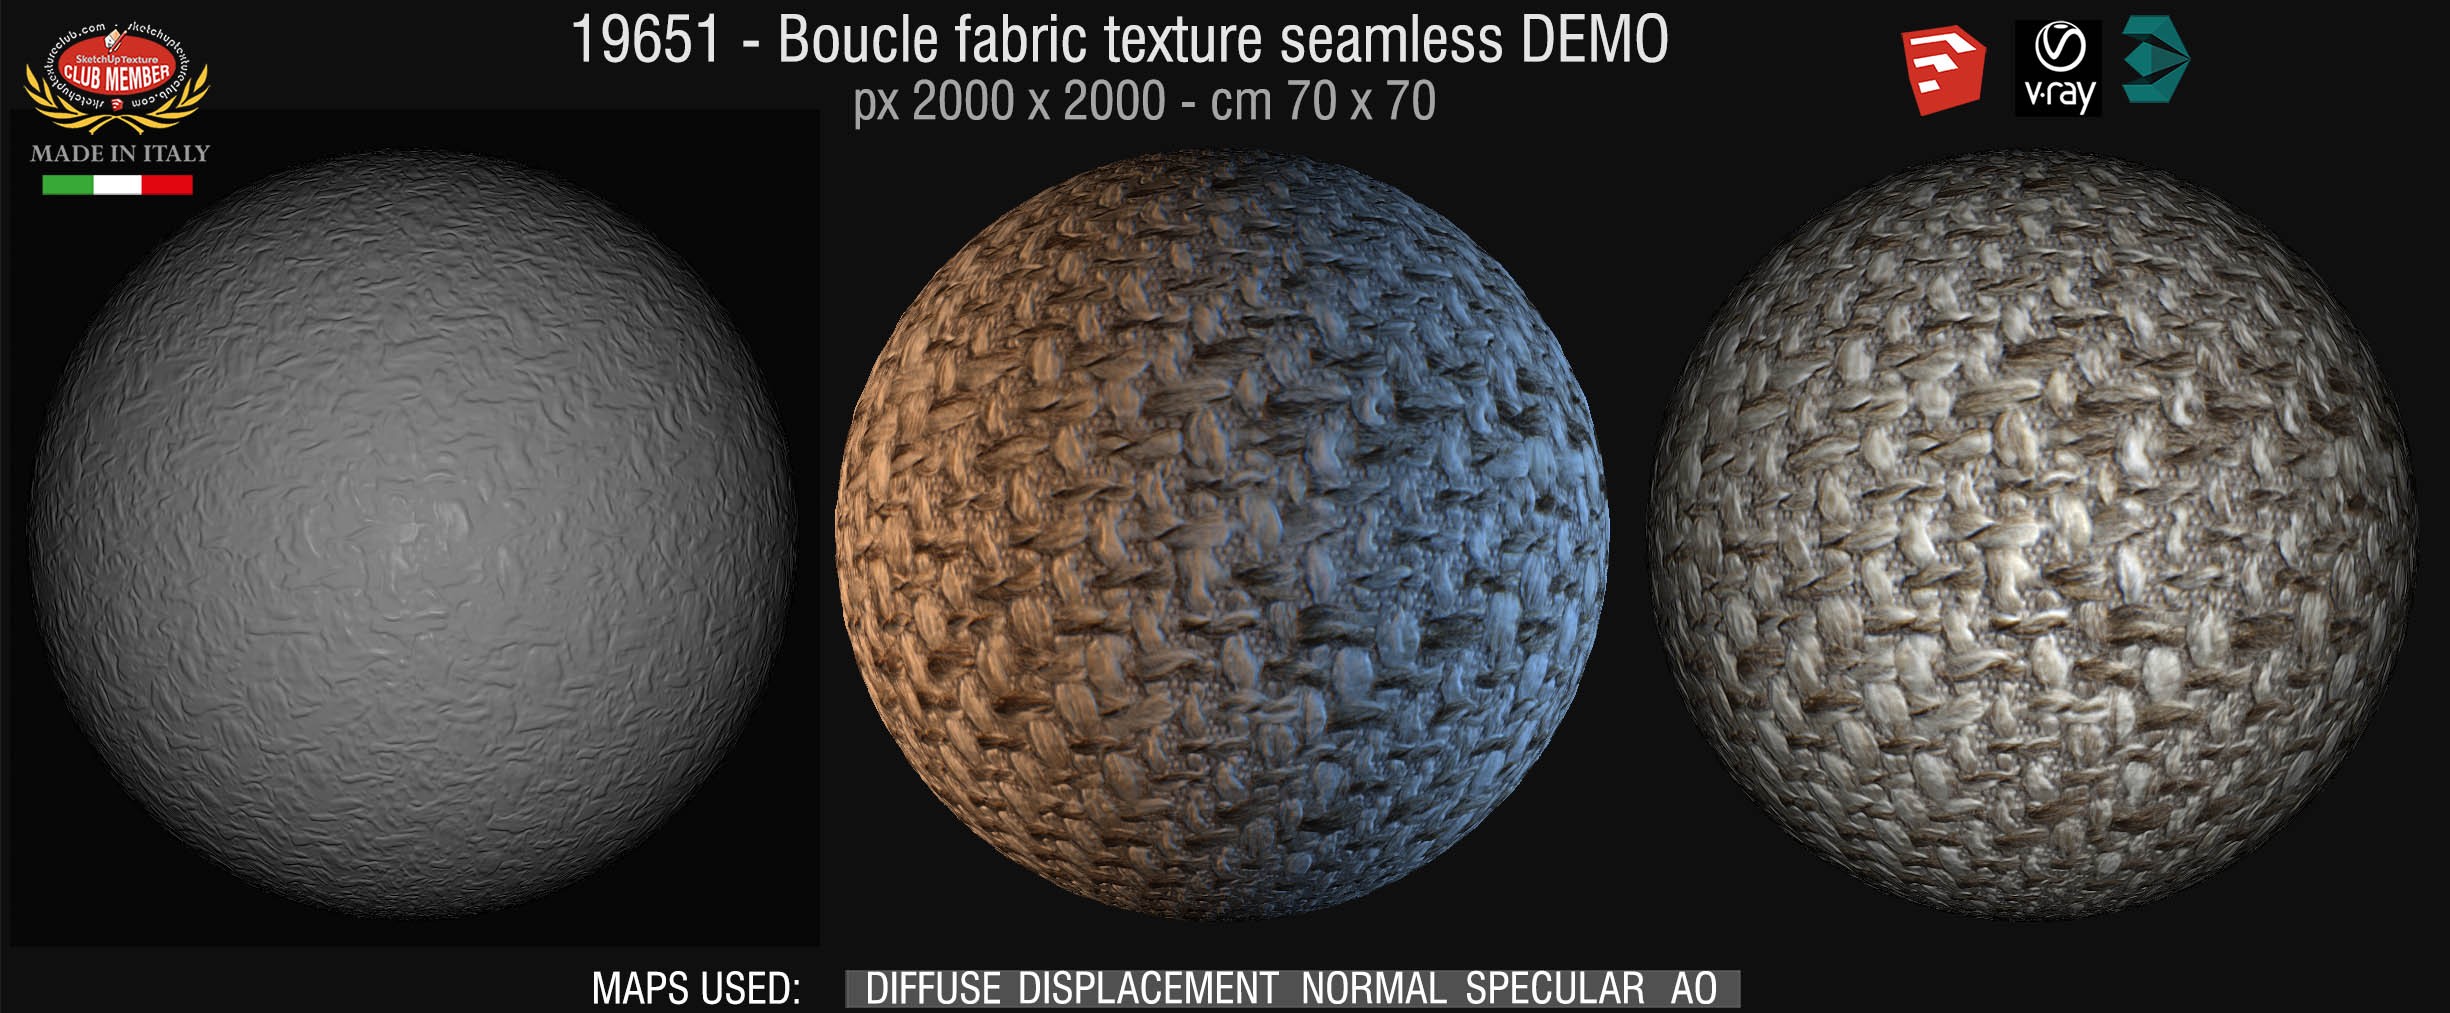 19651 Boucle fabric texture seamless + maps DEMO